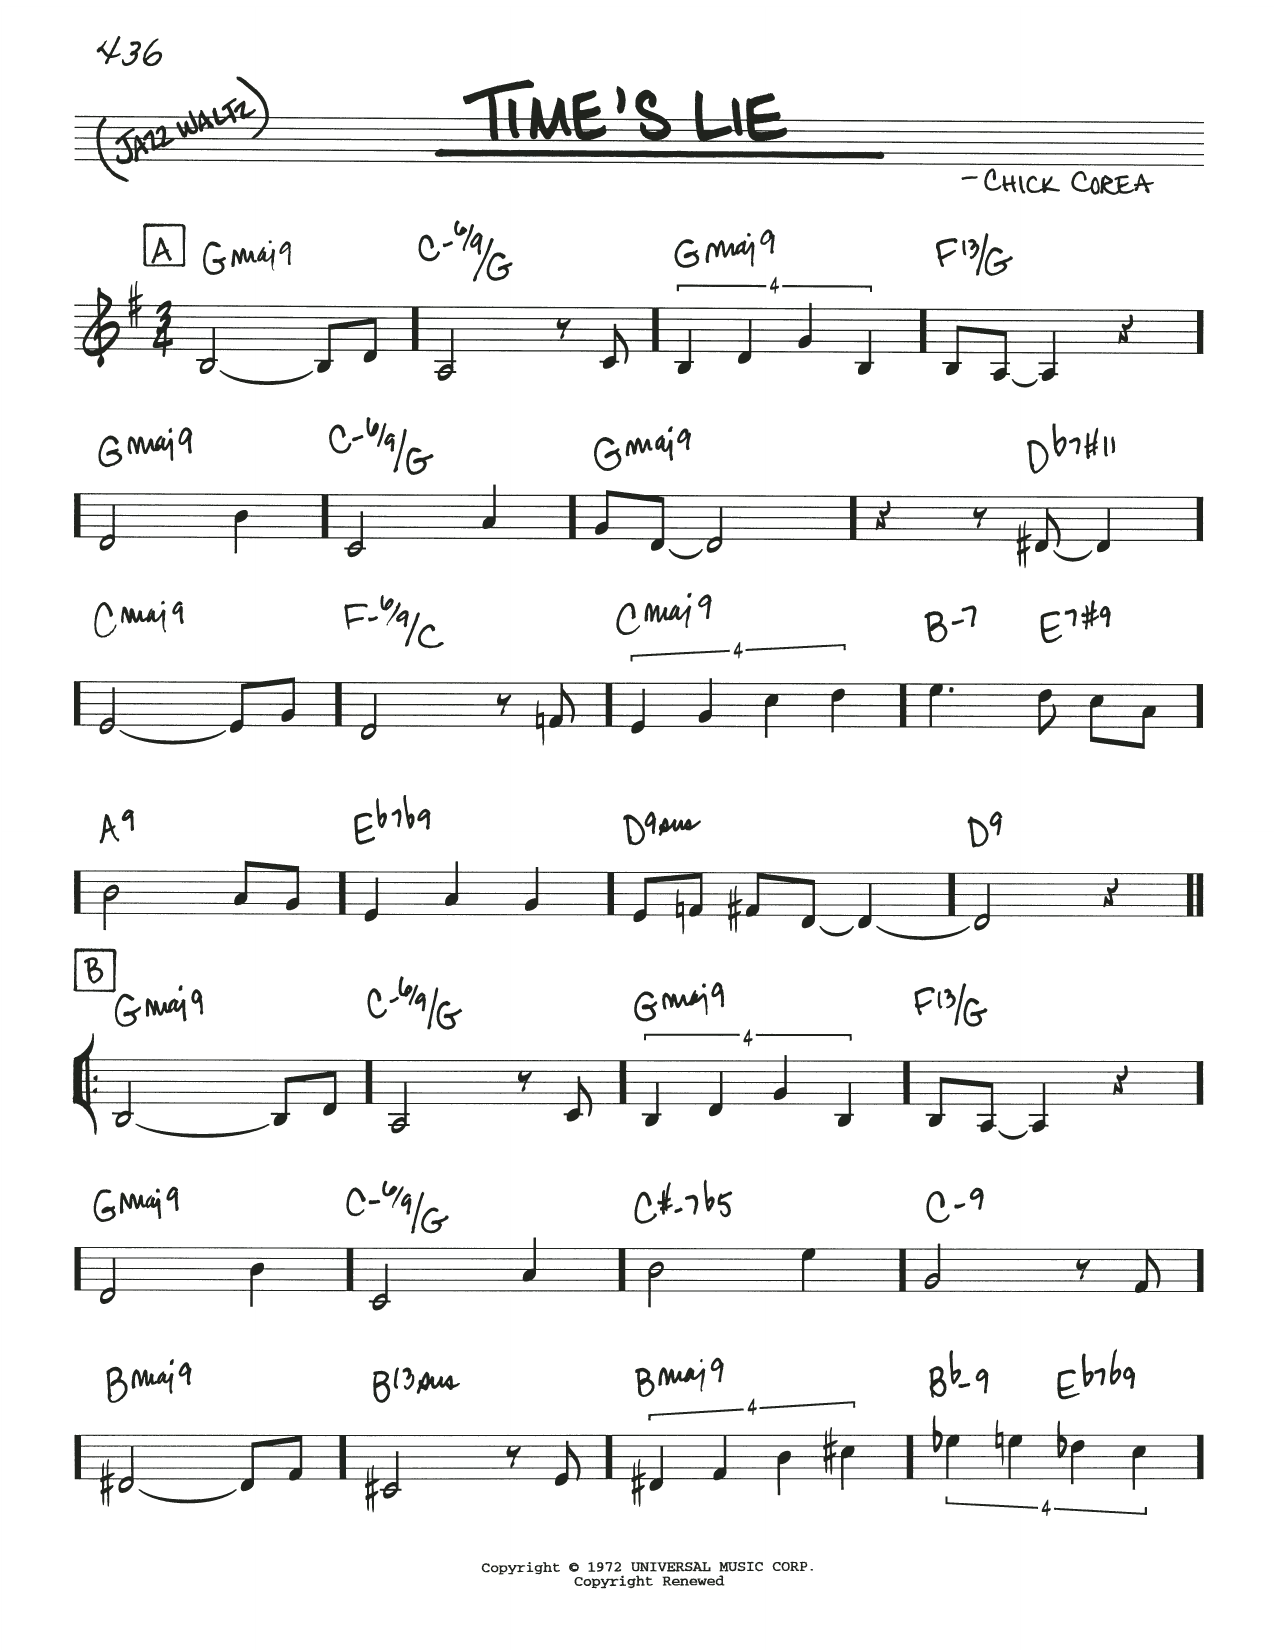 Download Chick Corea Time's Lie sheet music and printable PDF score & Jazz music notes